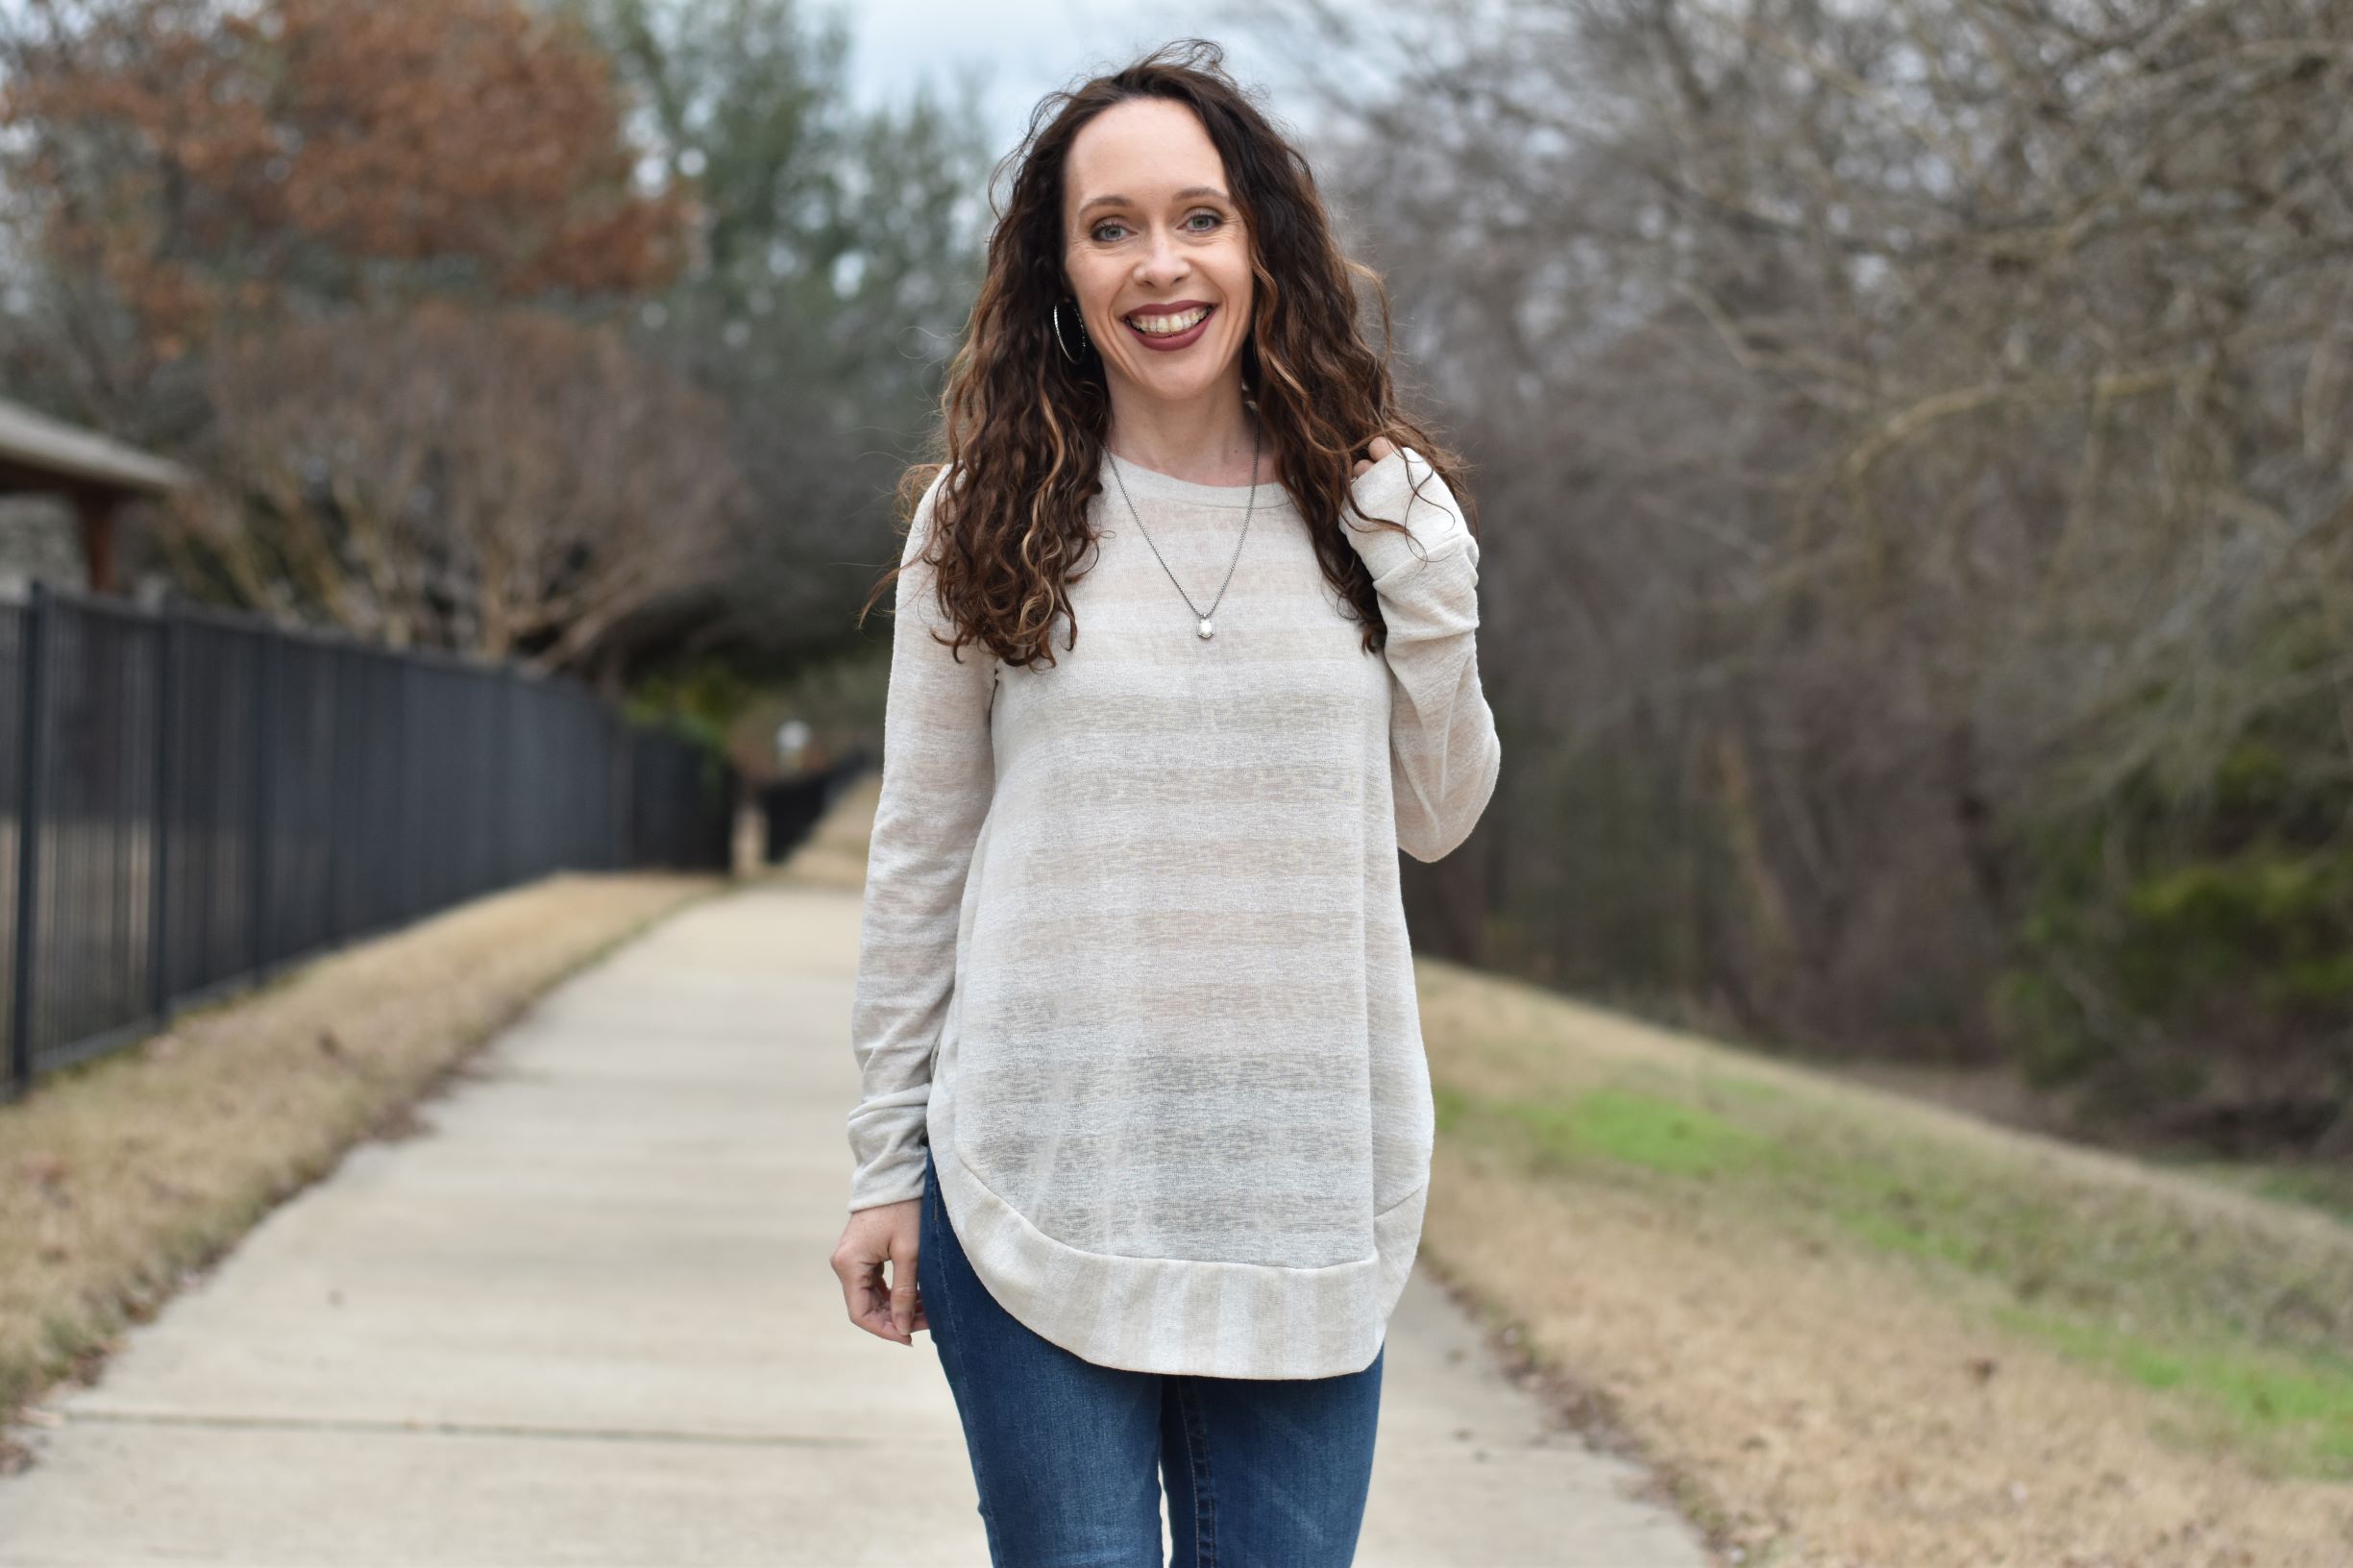 Budget-friendly Slouchy Sweater - Adored By Alex